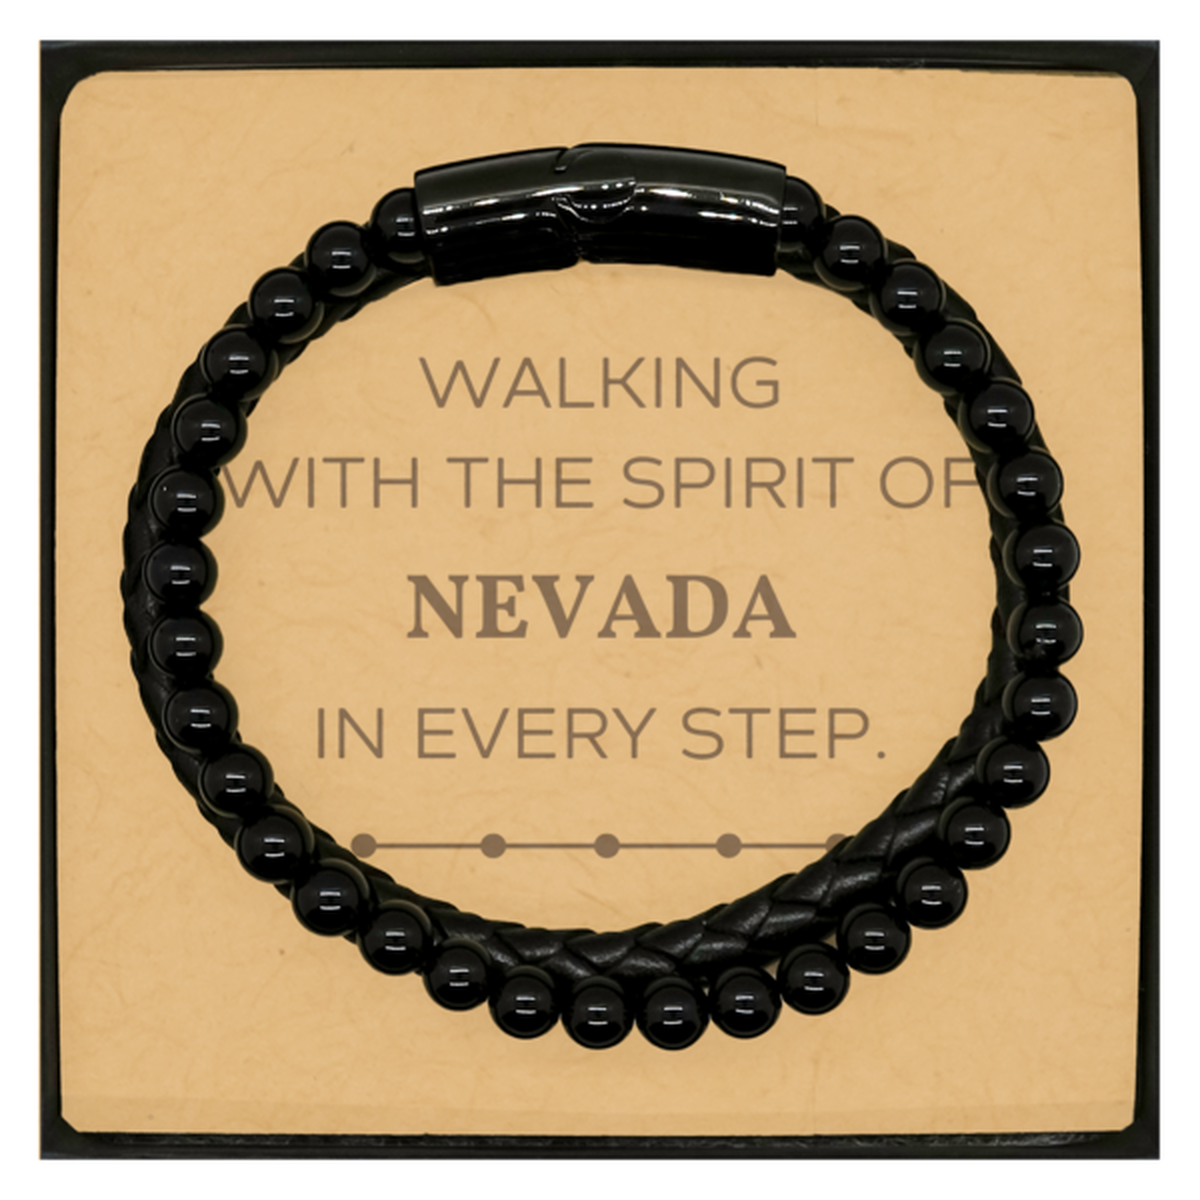 Nevada Gifts, Walking with the spirit, Love Nevada Birthday Christmas Stone Leather Bracelets For Nevada People, Men, Women, Friends